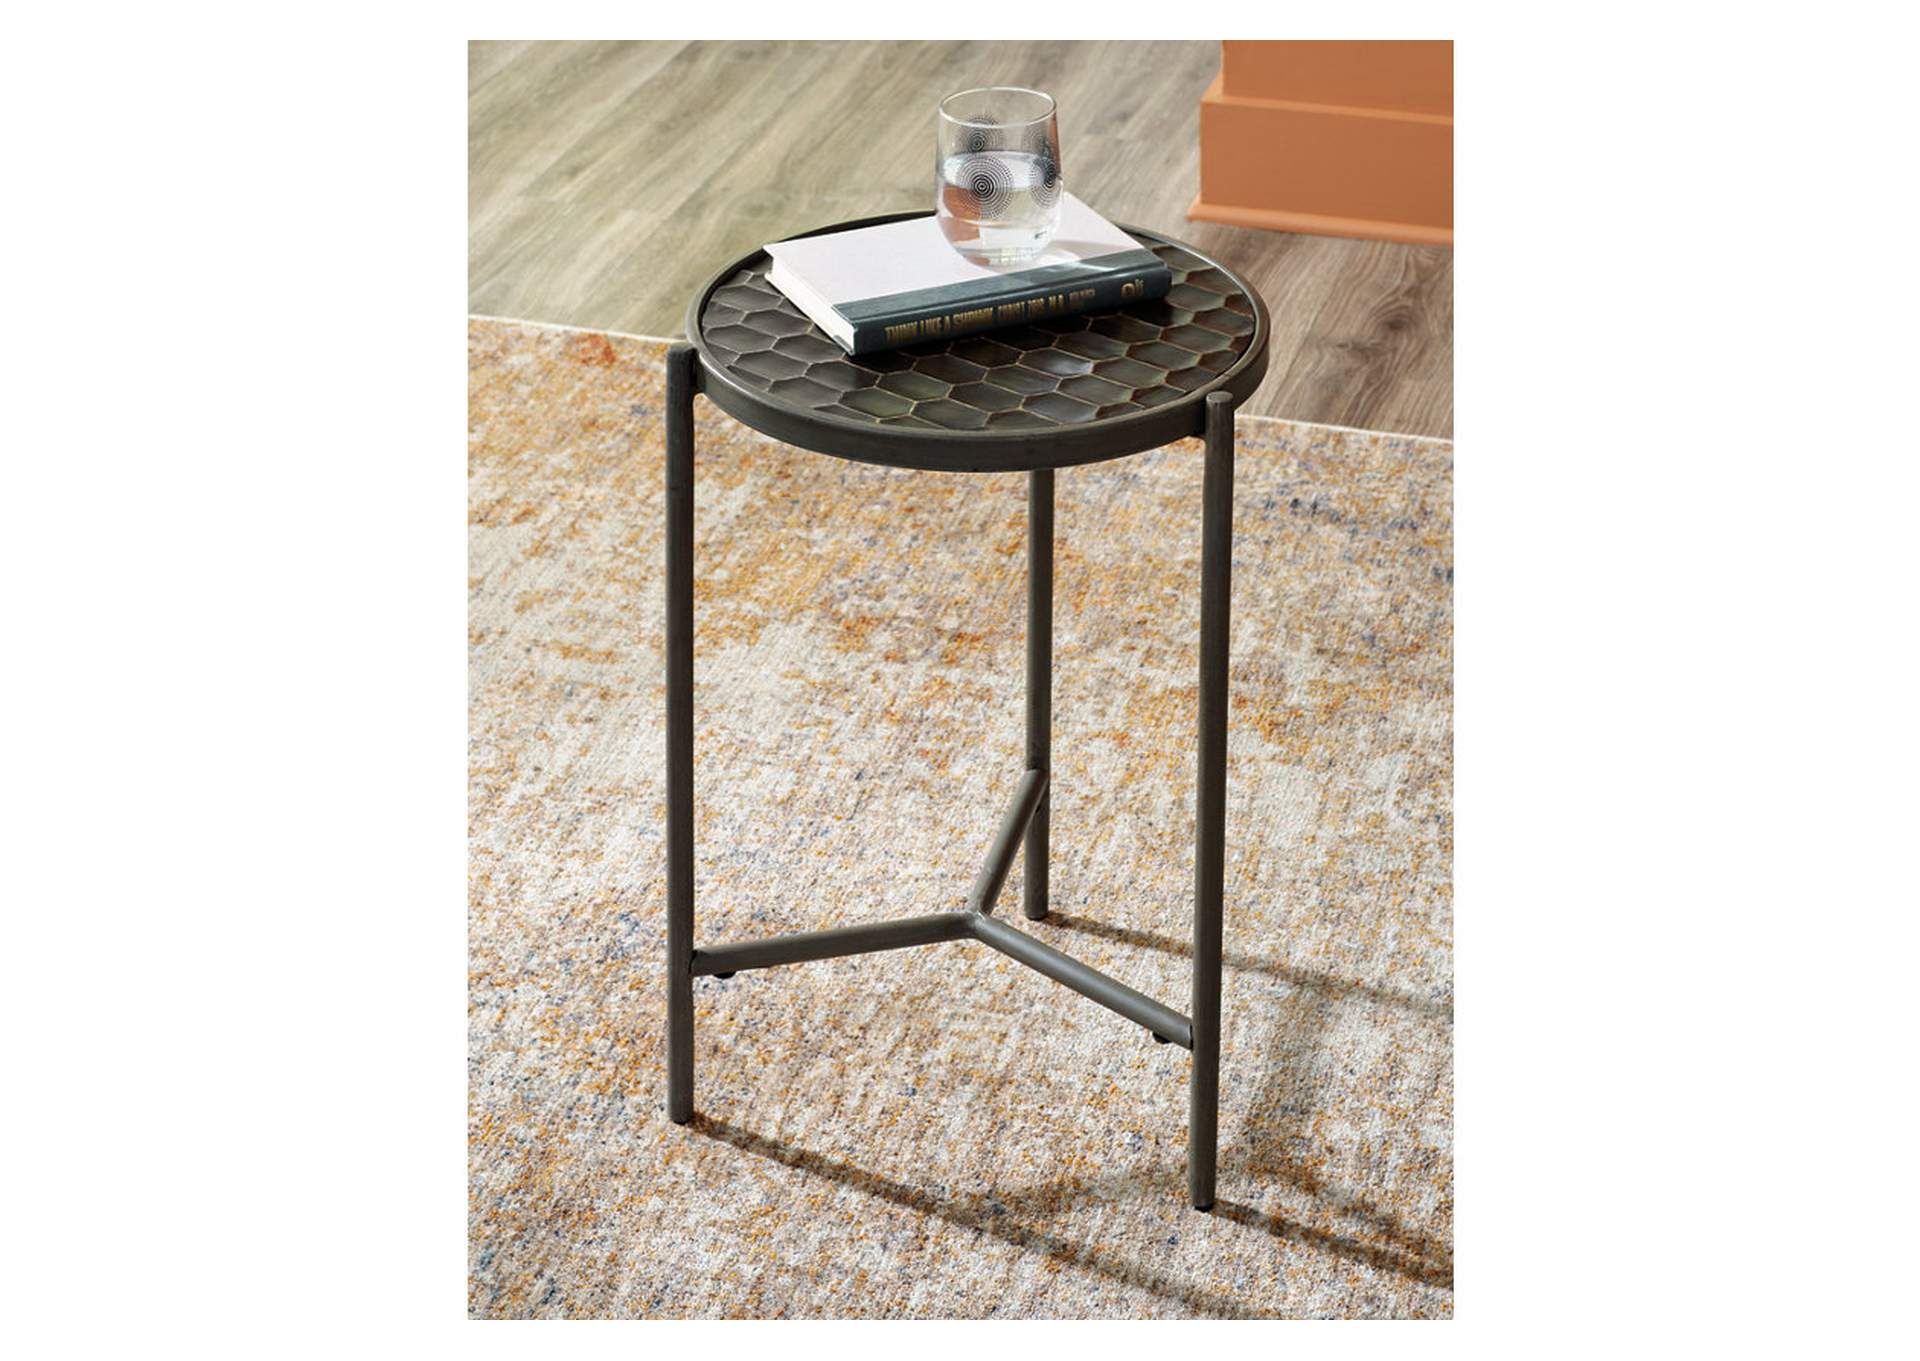 Doraley Chairside End Table,Signature Design By Ashley